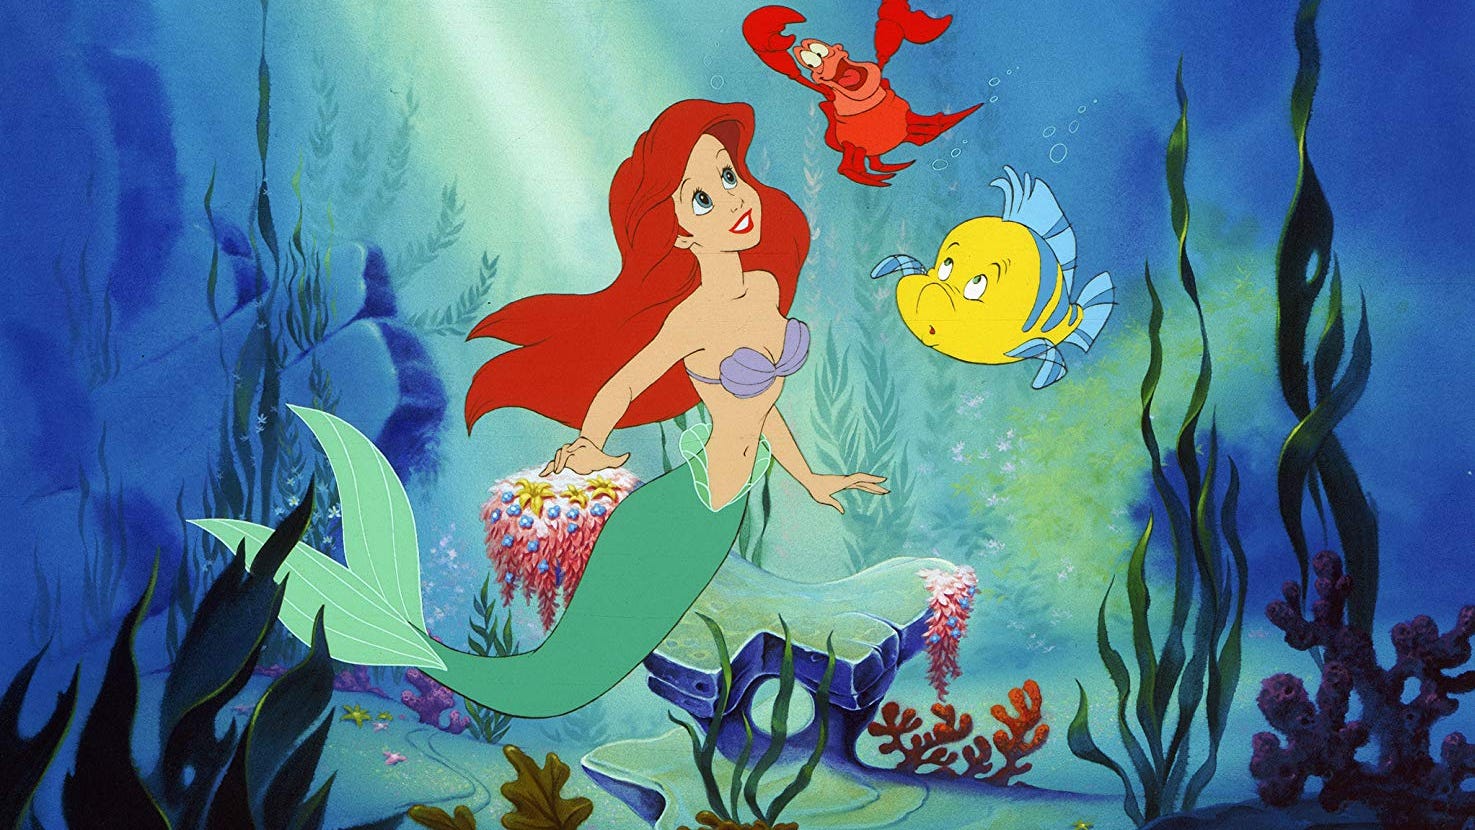 How to watch The Little Mermaid Reviewed